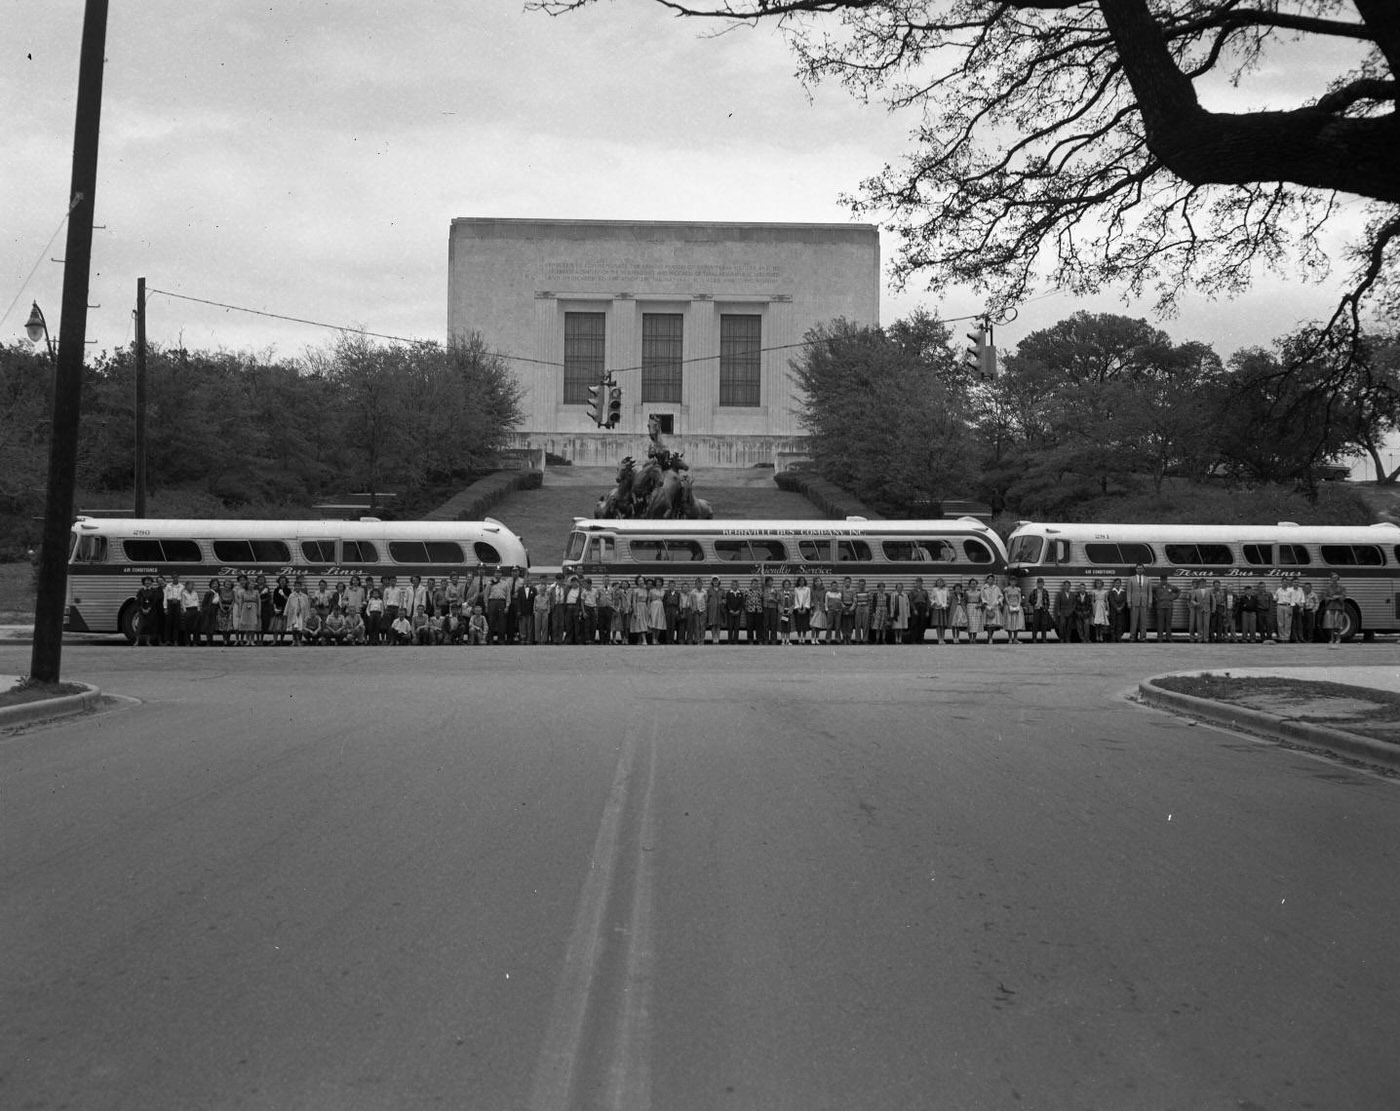 Texas Bus Lines at University of Texas Campus, 1956.